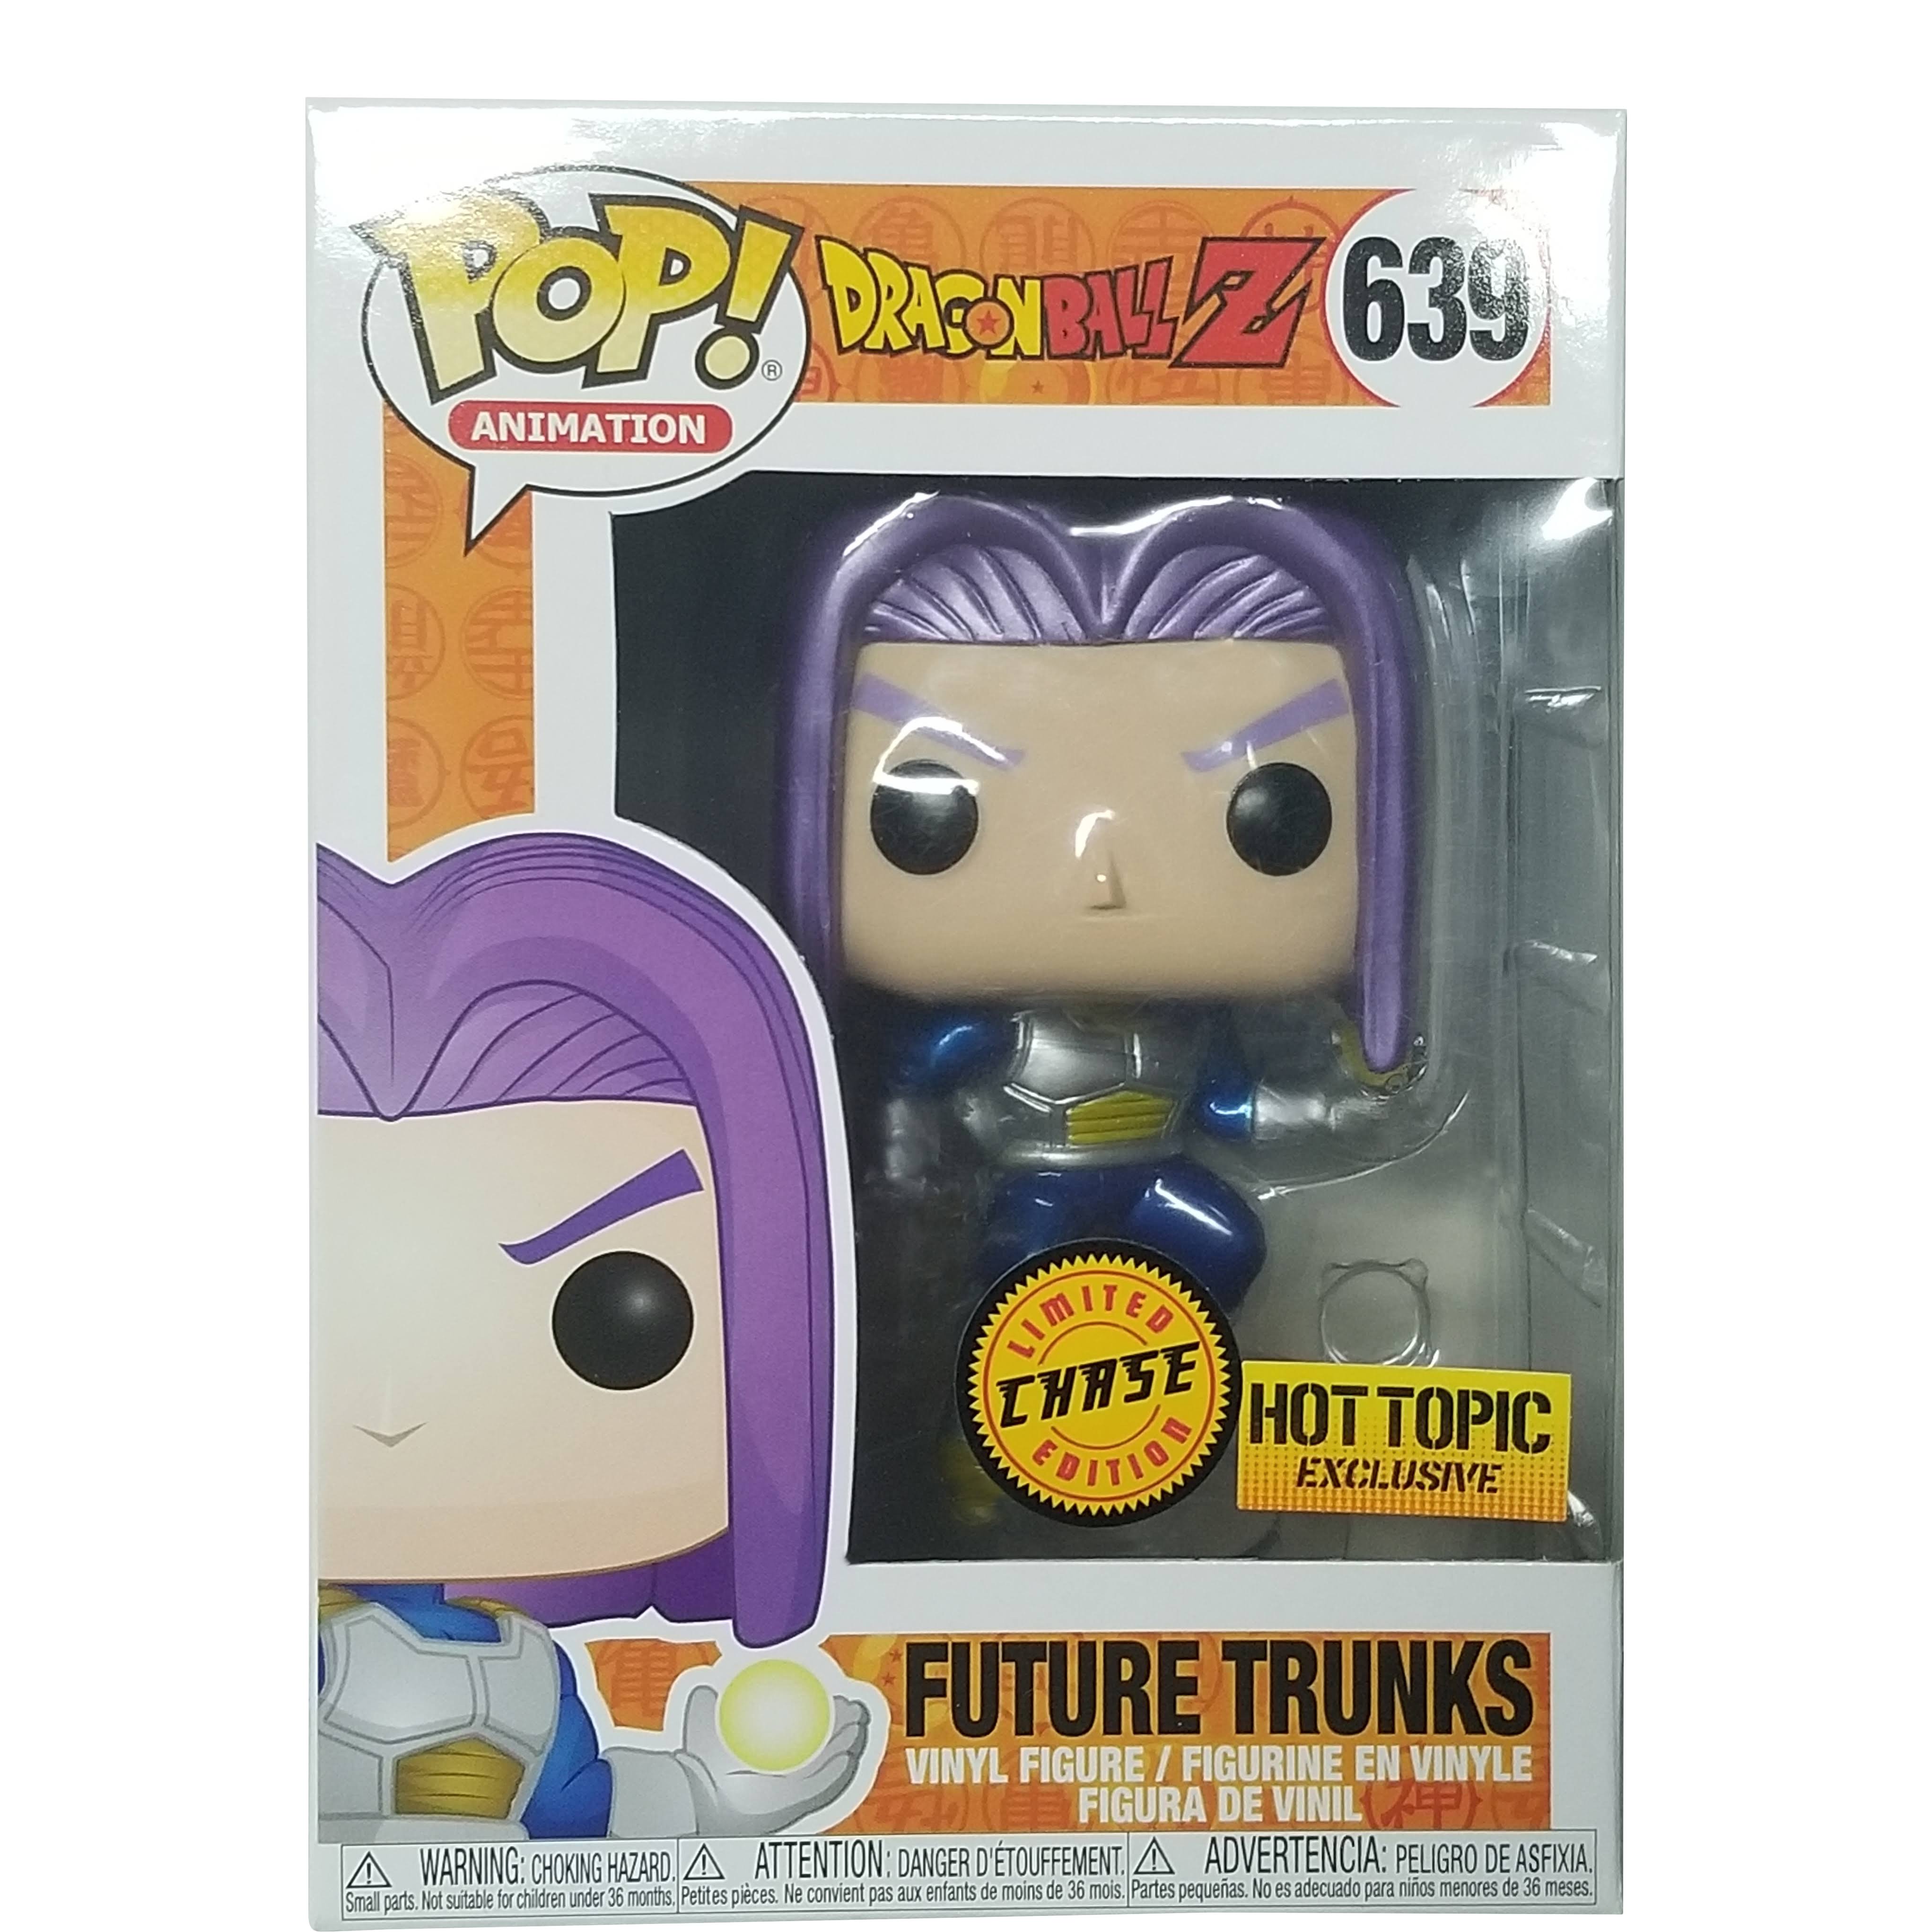 Funko Pop! Animation DragonBall Z Future Trunks (Chase) Hot Topic Exclusive Figure #639